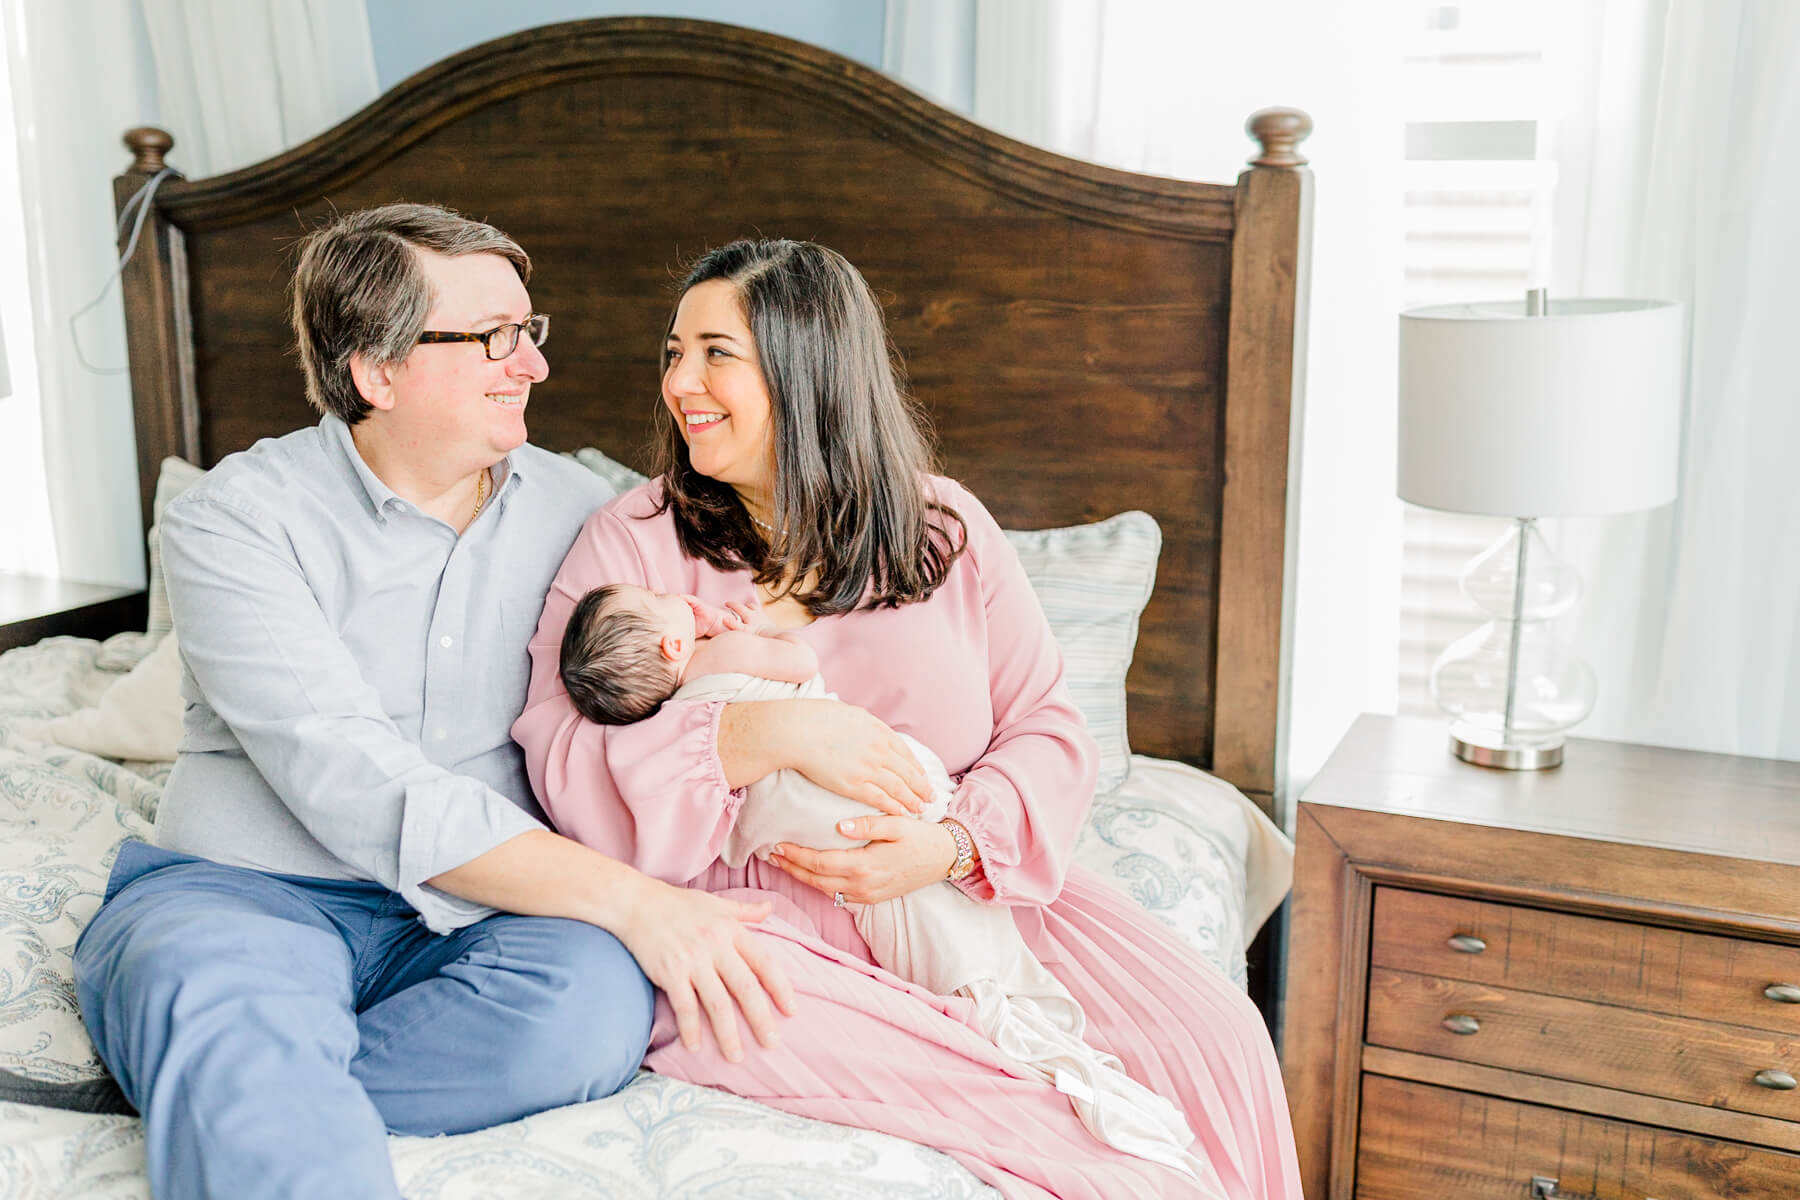 A mom and dad sit on the edge of a bed smiling at each other while mom holds their newborn baby after visiting learning express newton